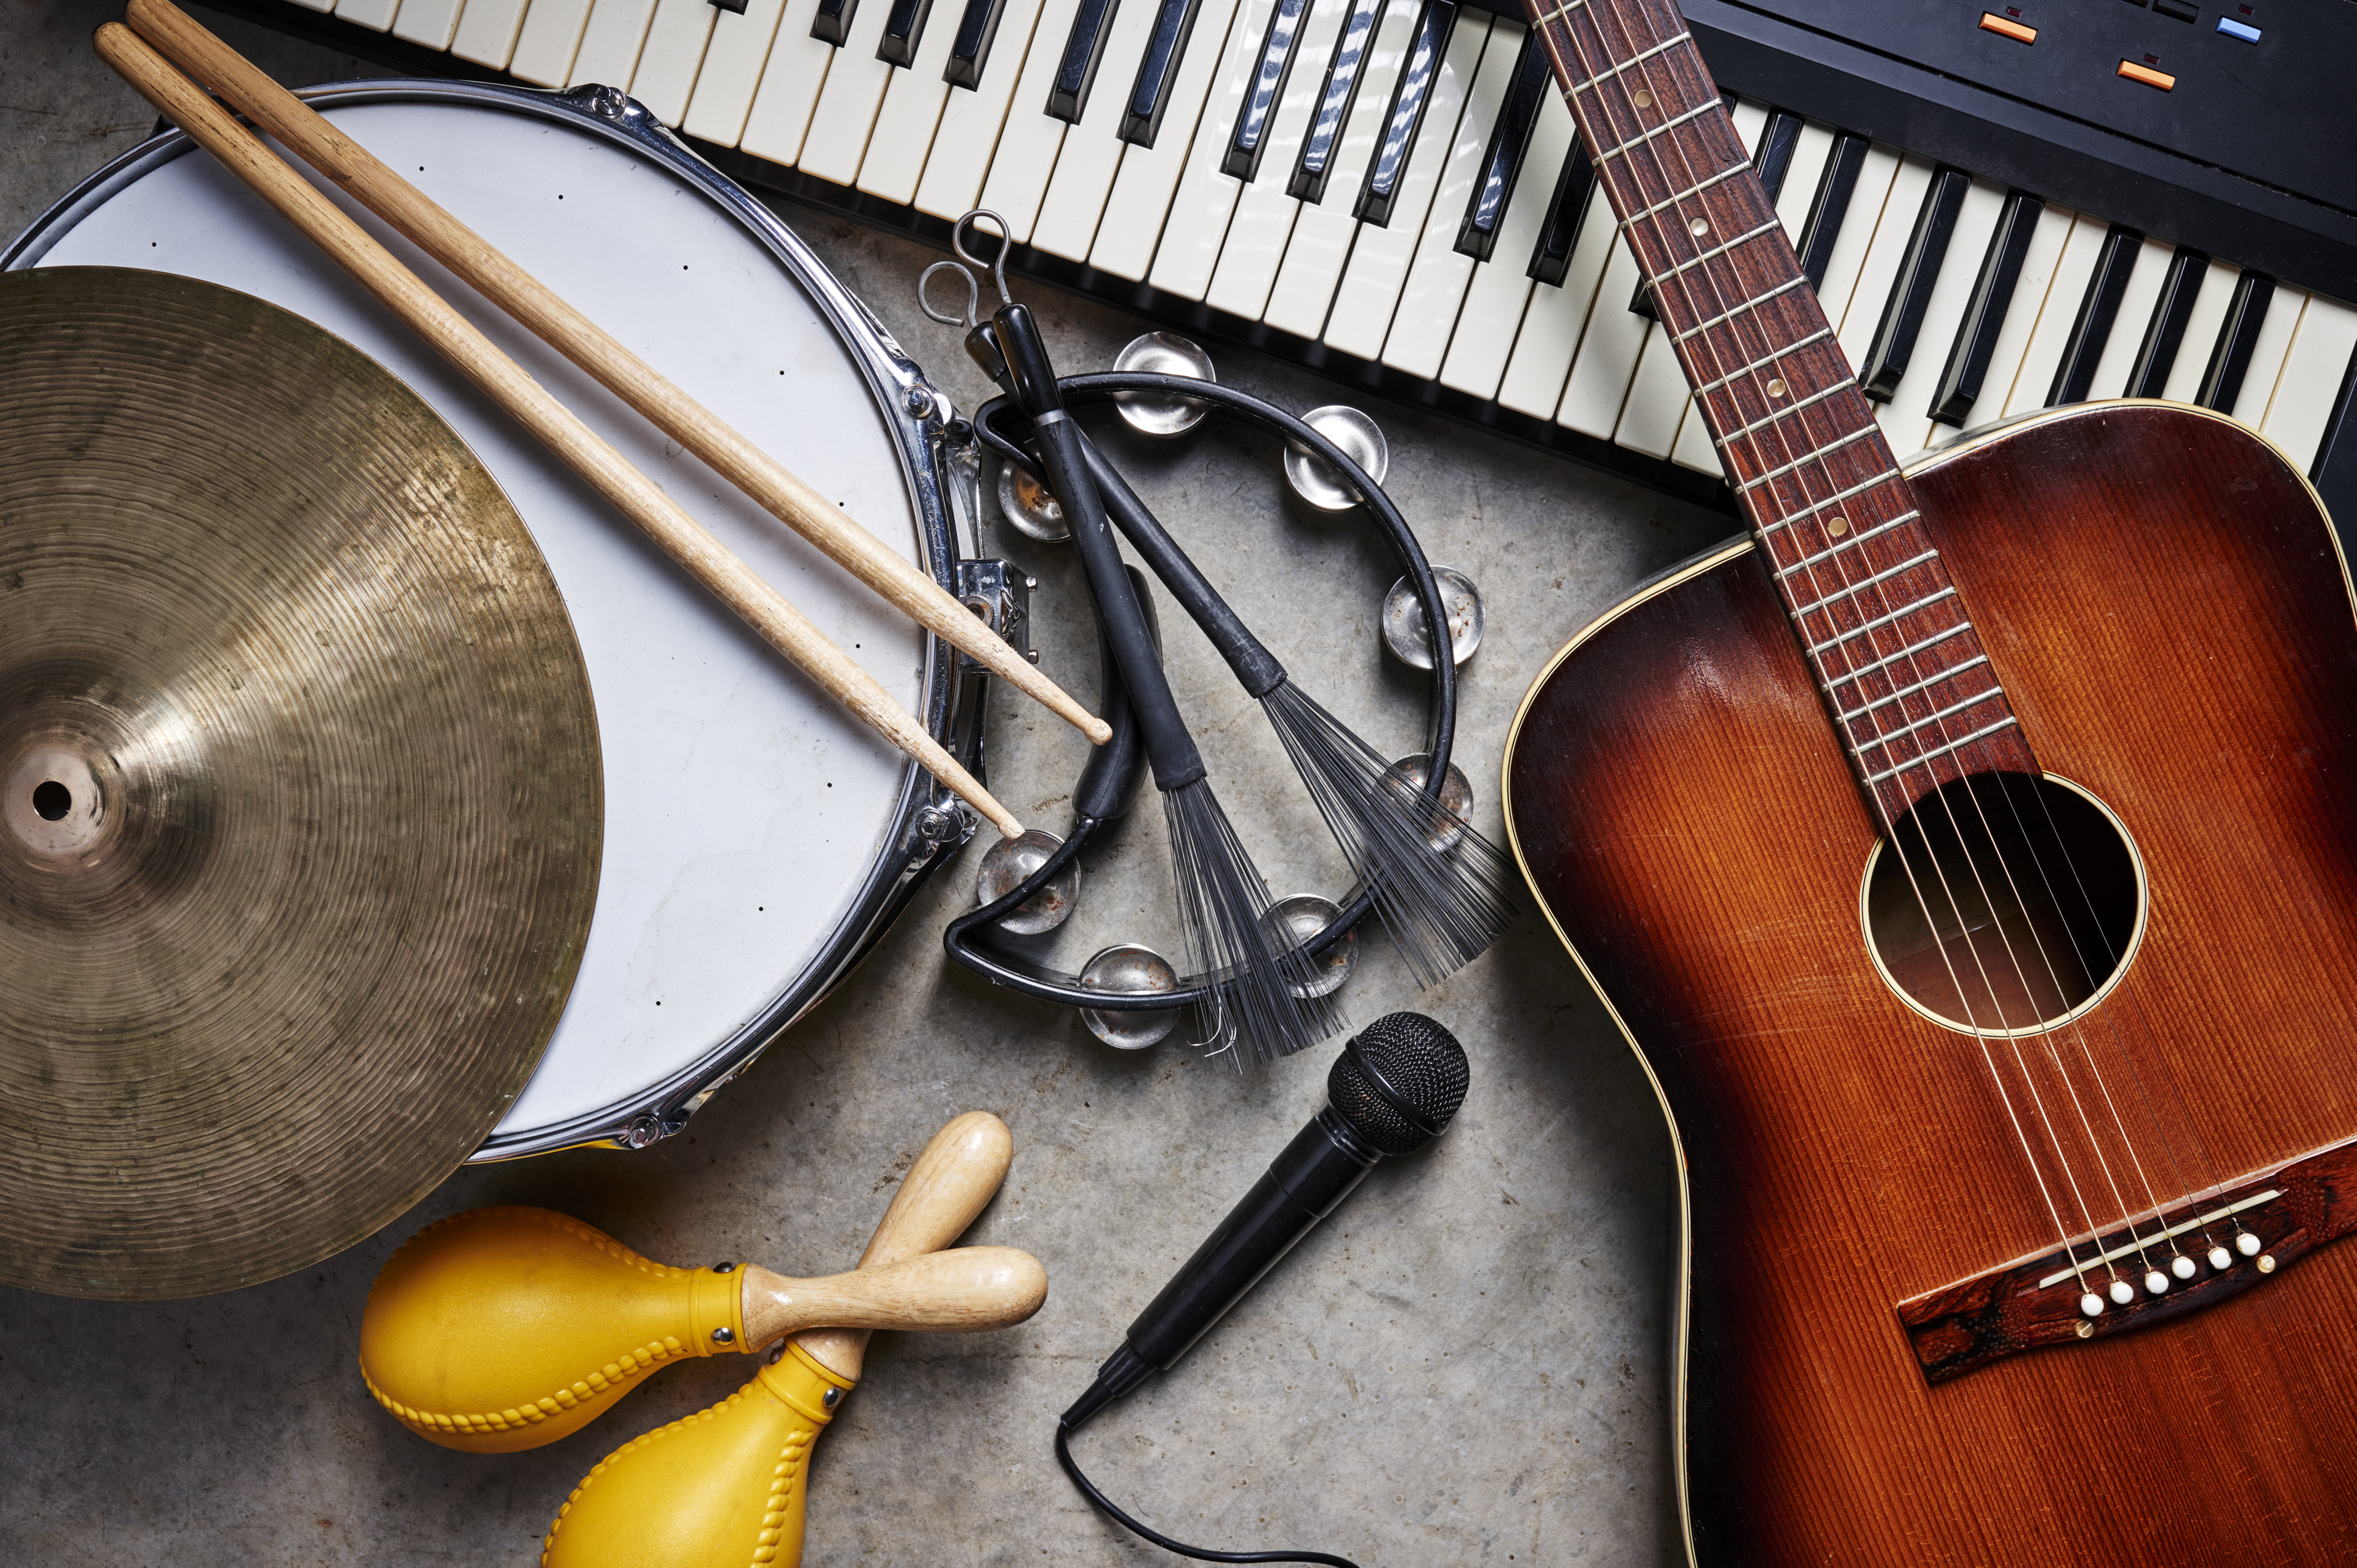 A collection of musical instruments